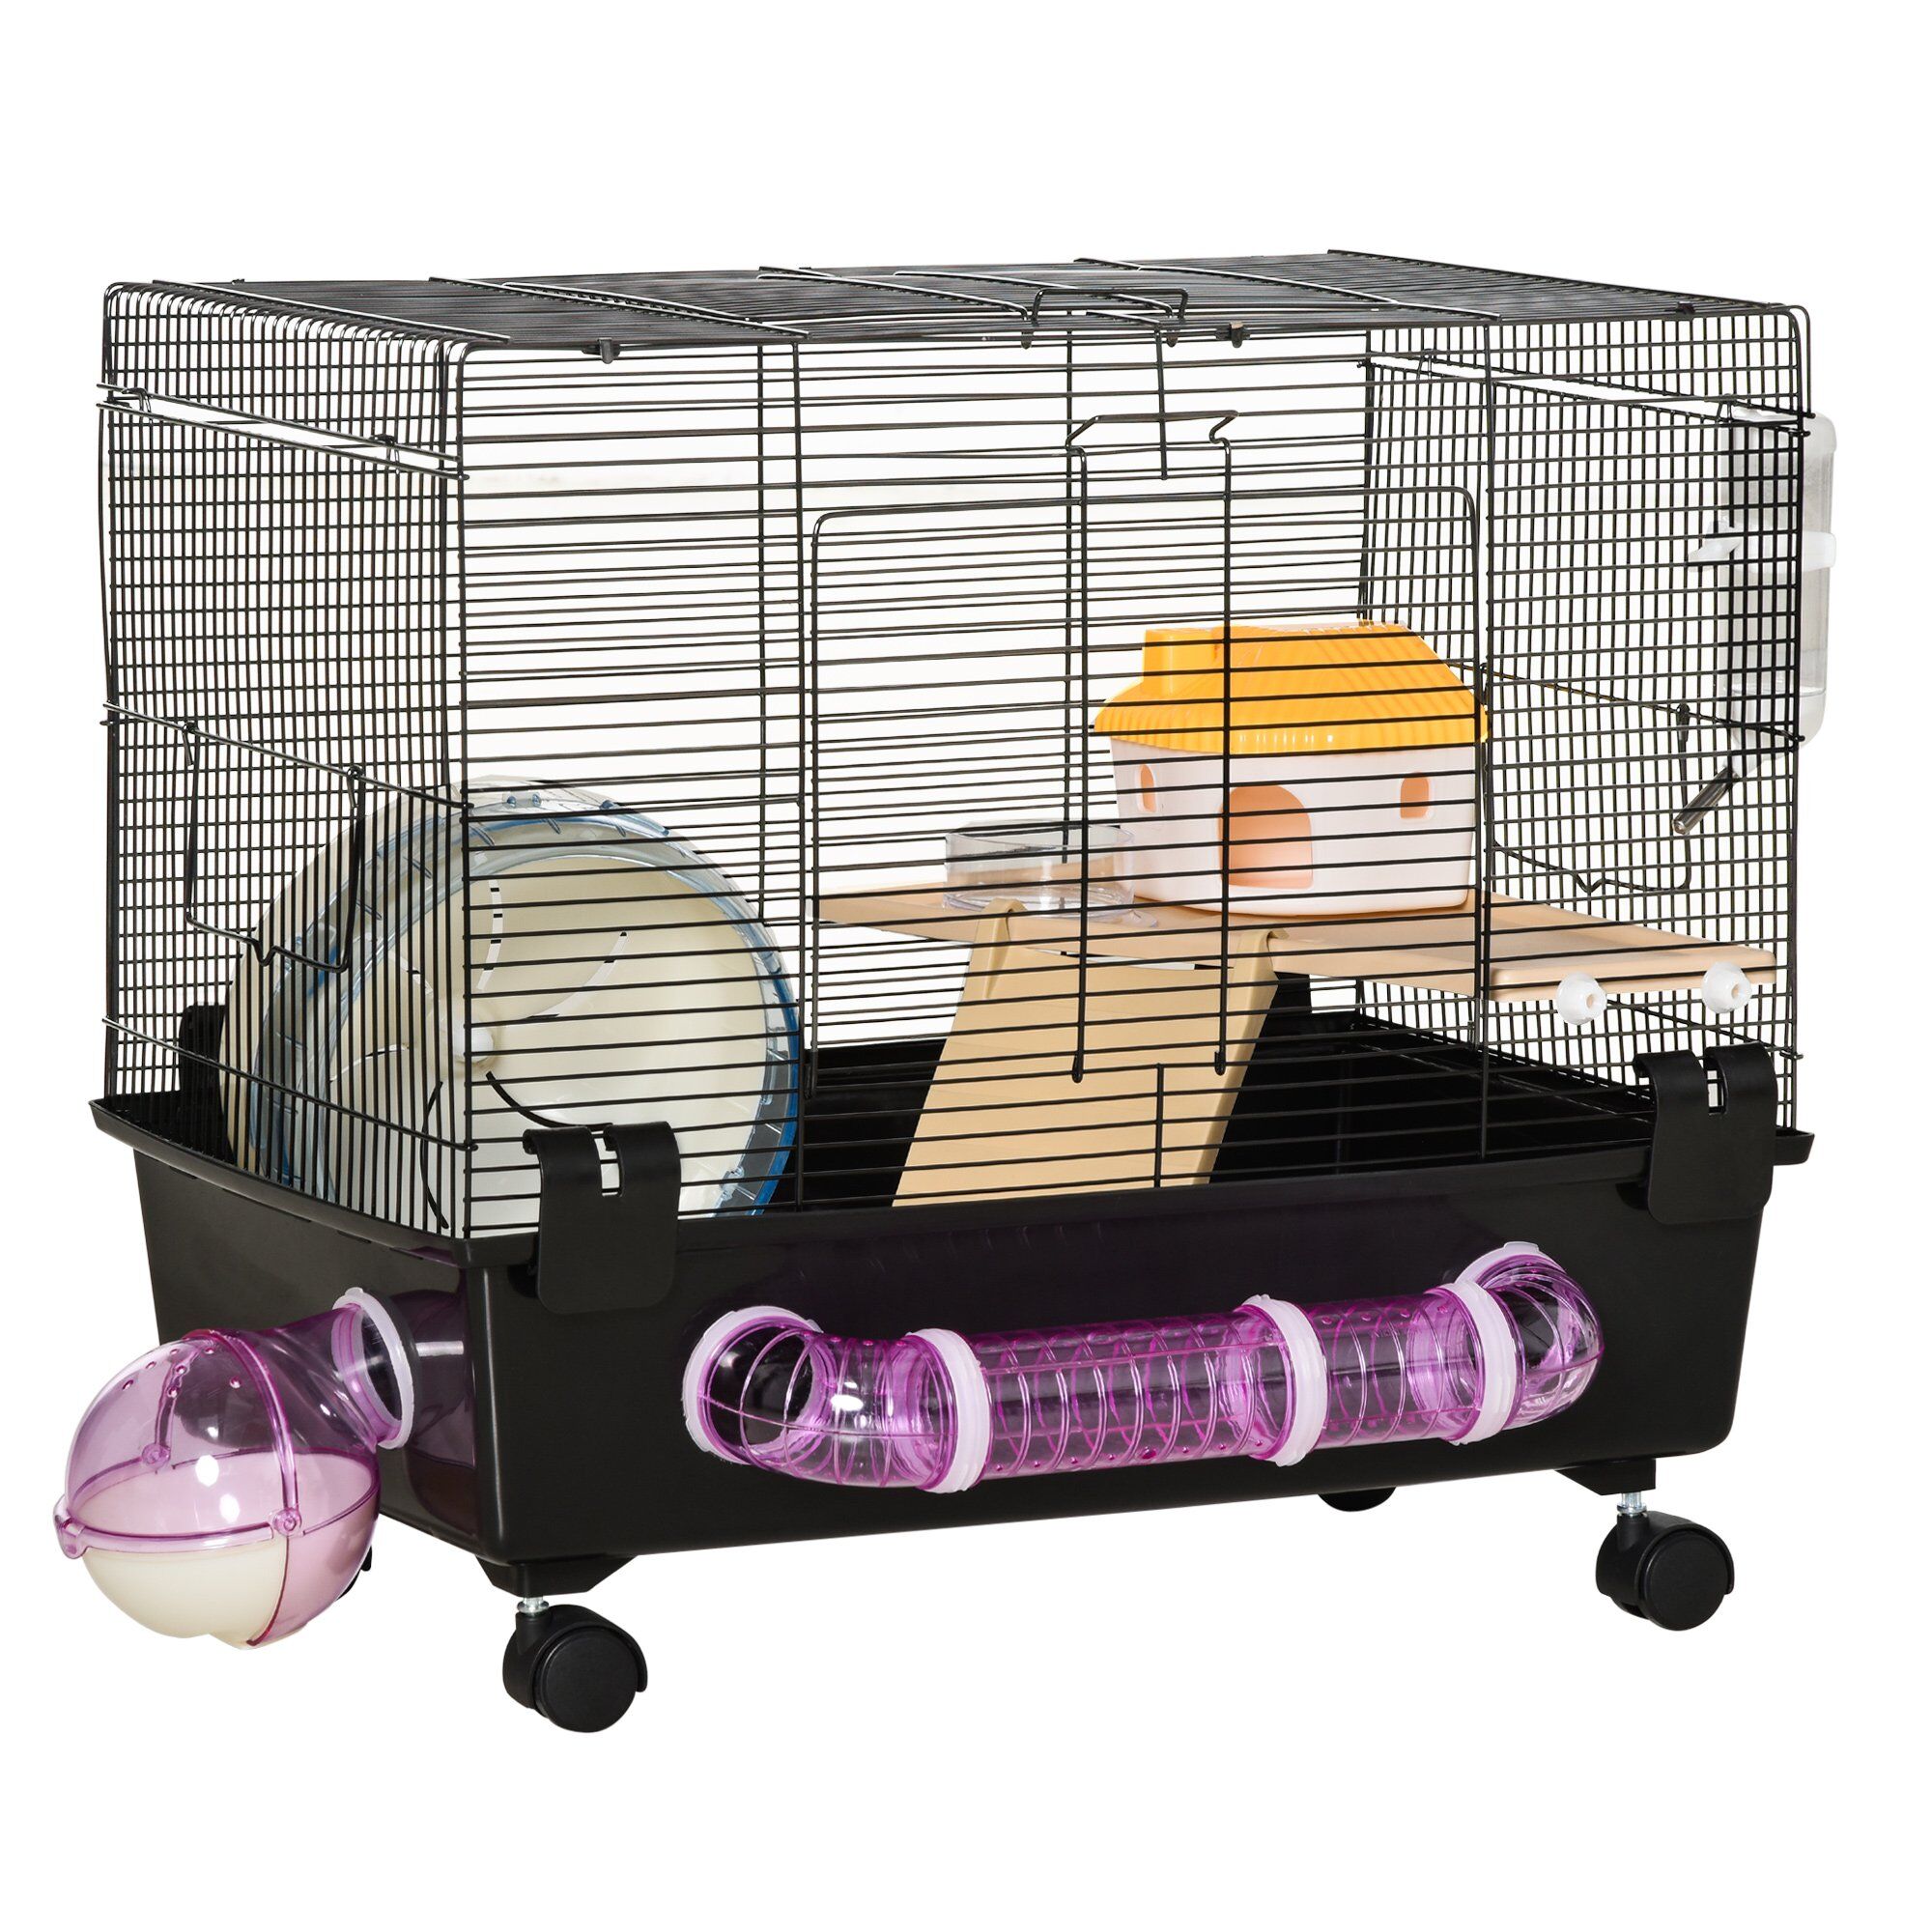 PawHut 2-Tier Hamster Cage, Small Animal Habitat with Exercise Wheel, Water Bottle, and Food Dishes, for Rats, Gerbils,